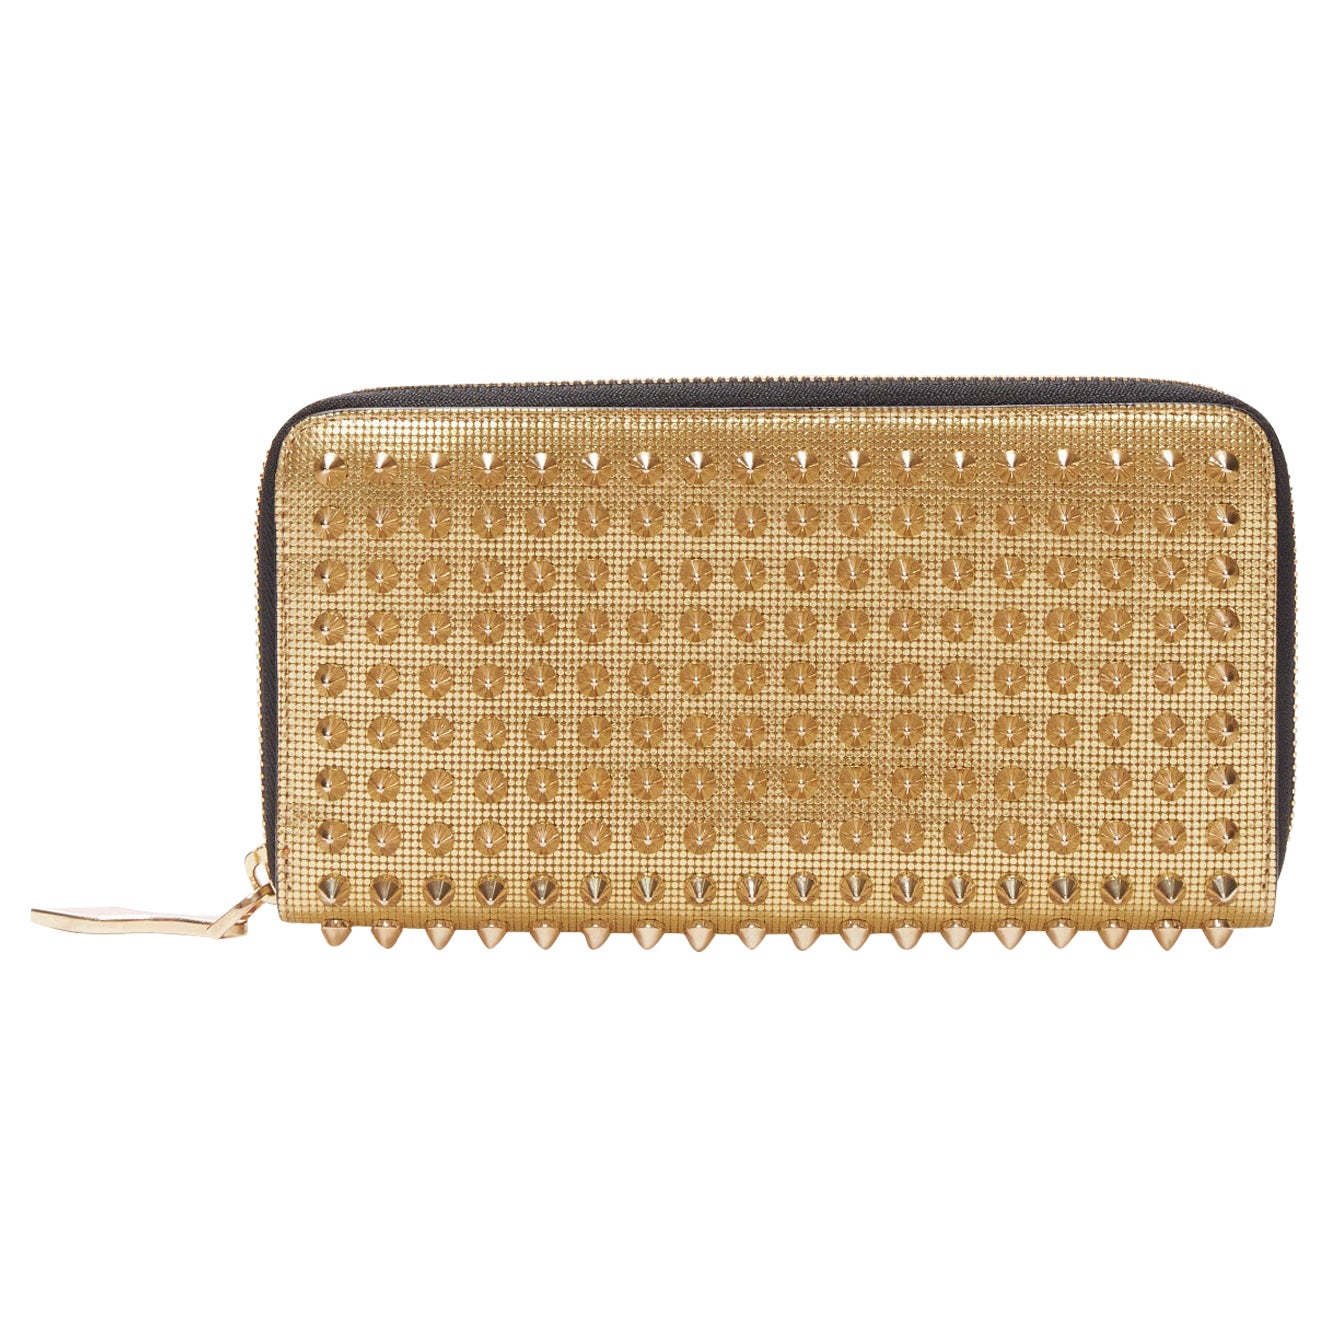 CHRISTIAN LOUBOUTIN Panettone gold studded leather zip around long wallet For Sale